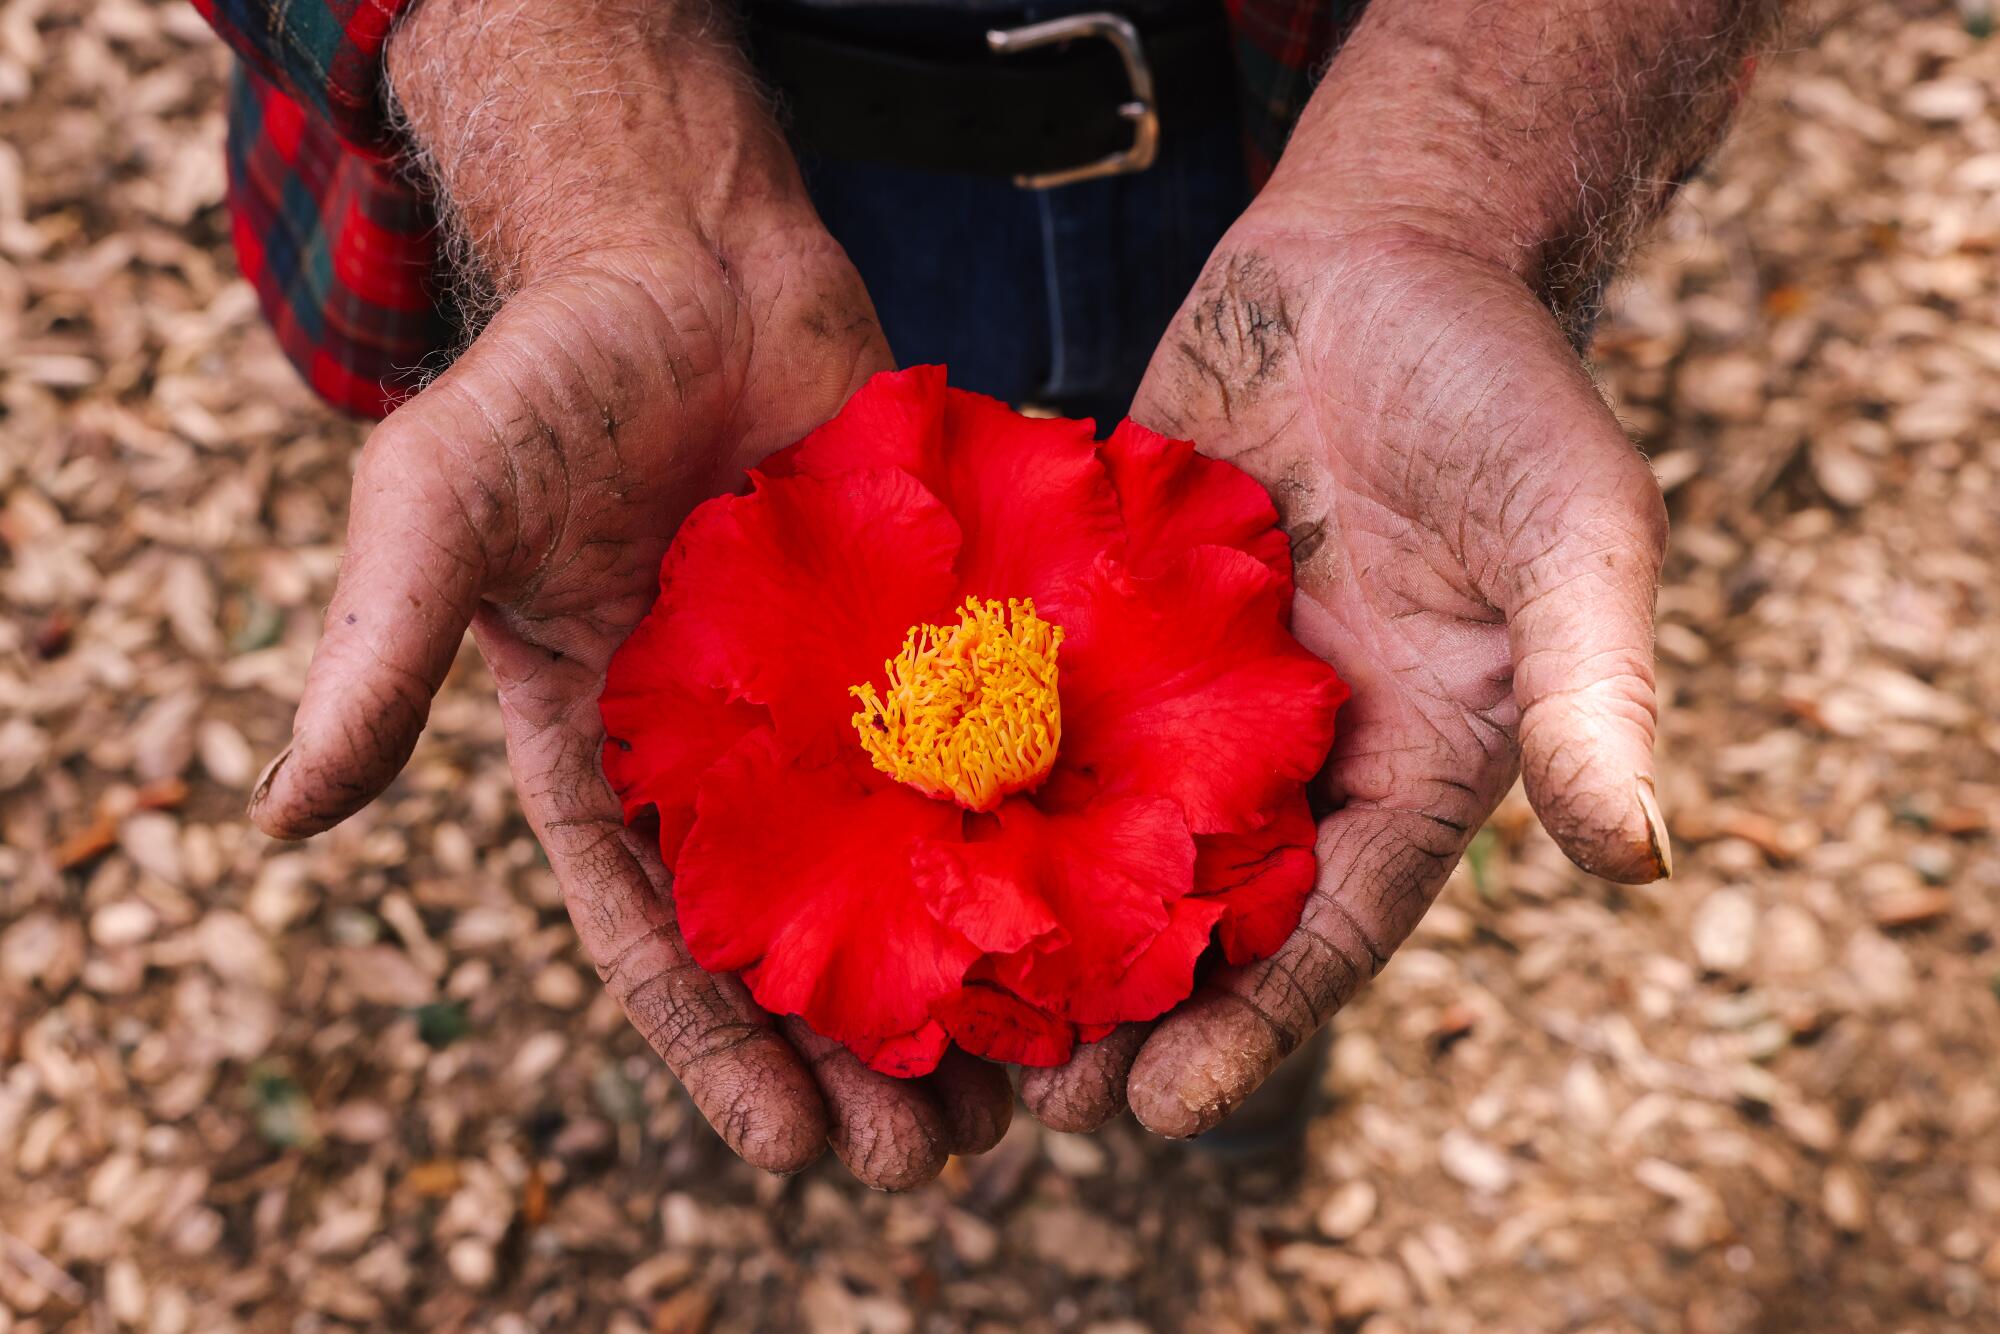 Tom Nuccio cradles a Grand Slam camellia, another variety created by his family, in his work-rough hands.